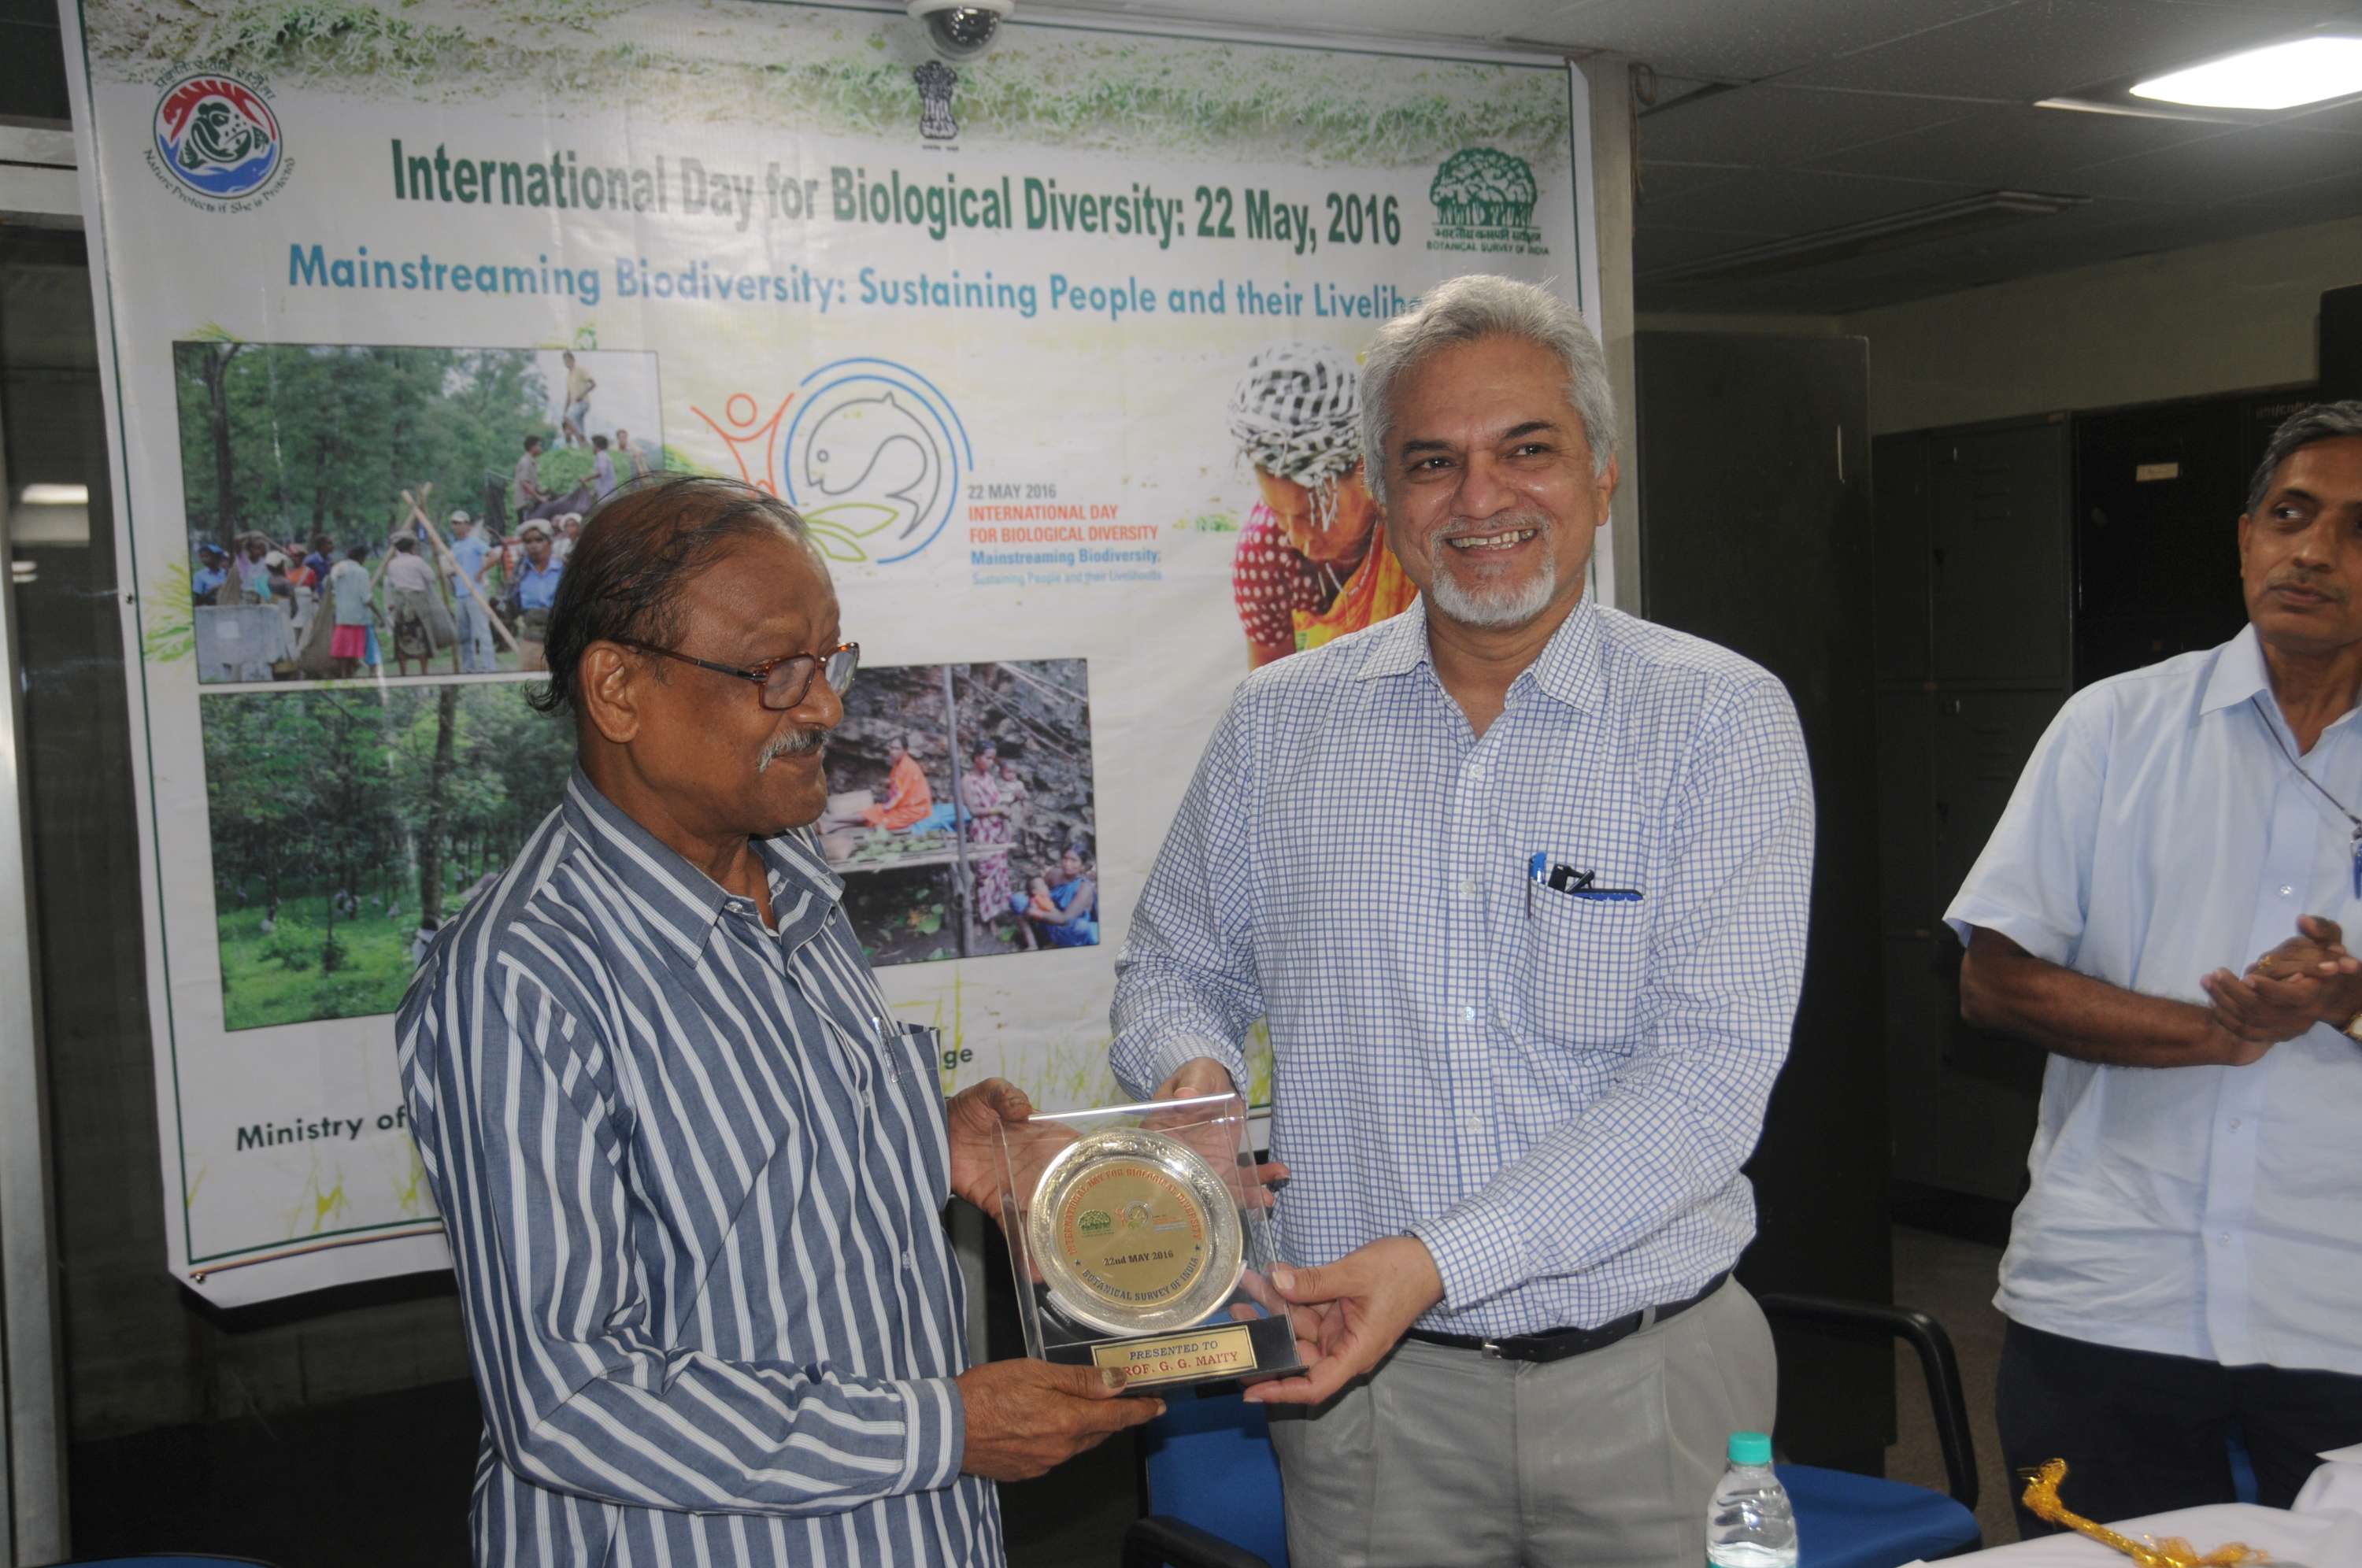 D/BSI presenting memento to the chief guest Prof. G.G. Maity on 22 May Biological Diversity Day 2016